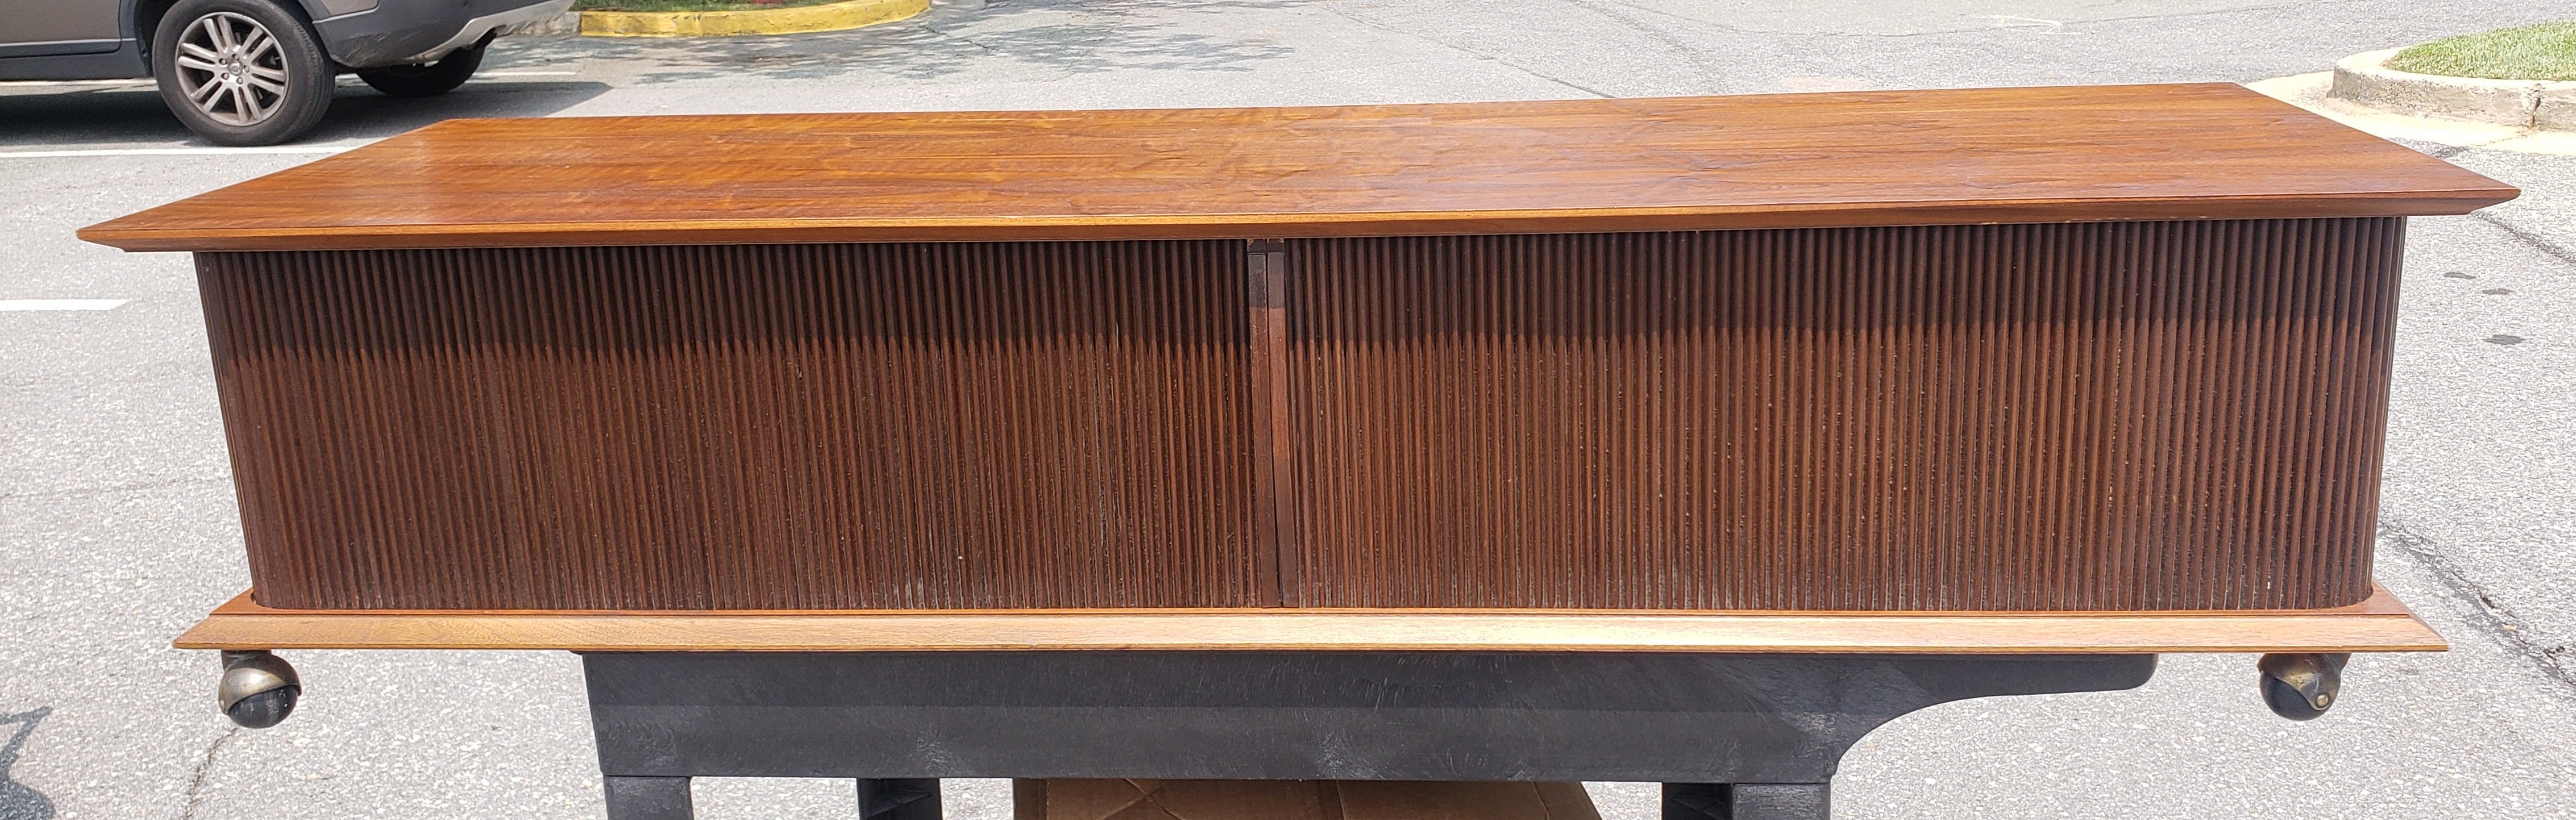 A rare Lane Mid-Century Modern Style Teak And Tambour Door Base Rolling Coffee Table in great vintage condition. 
The Two Sliding tambour doors will close completely to leave the oposite side patially open to reveal the storage compartments. 